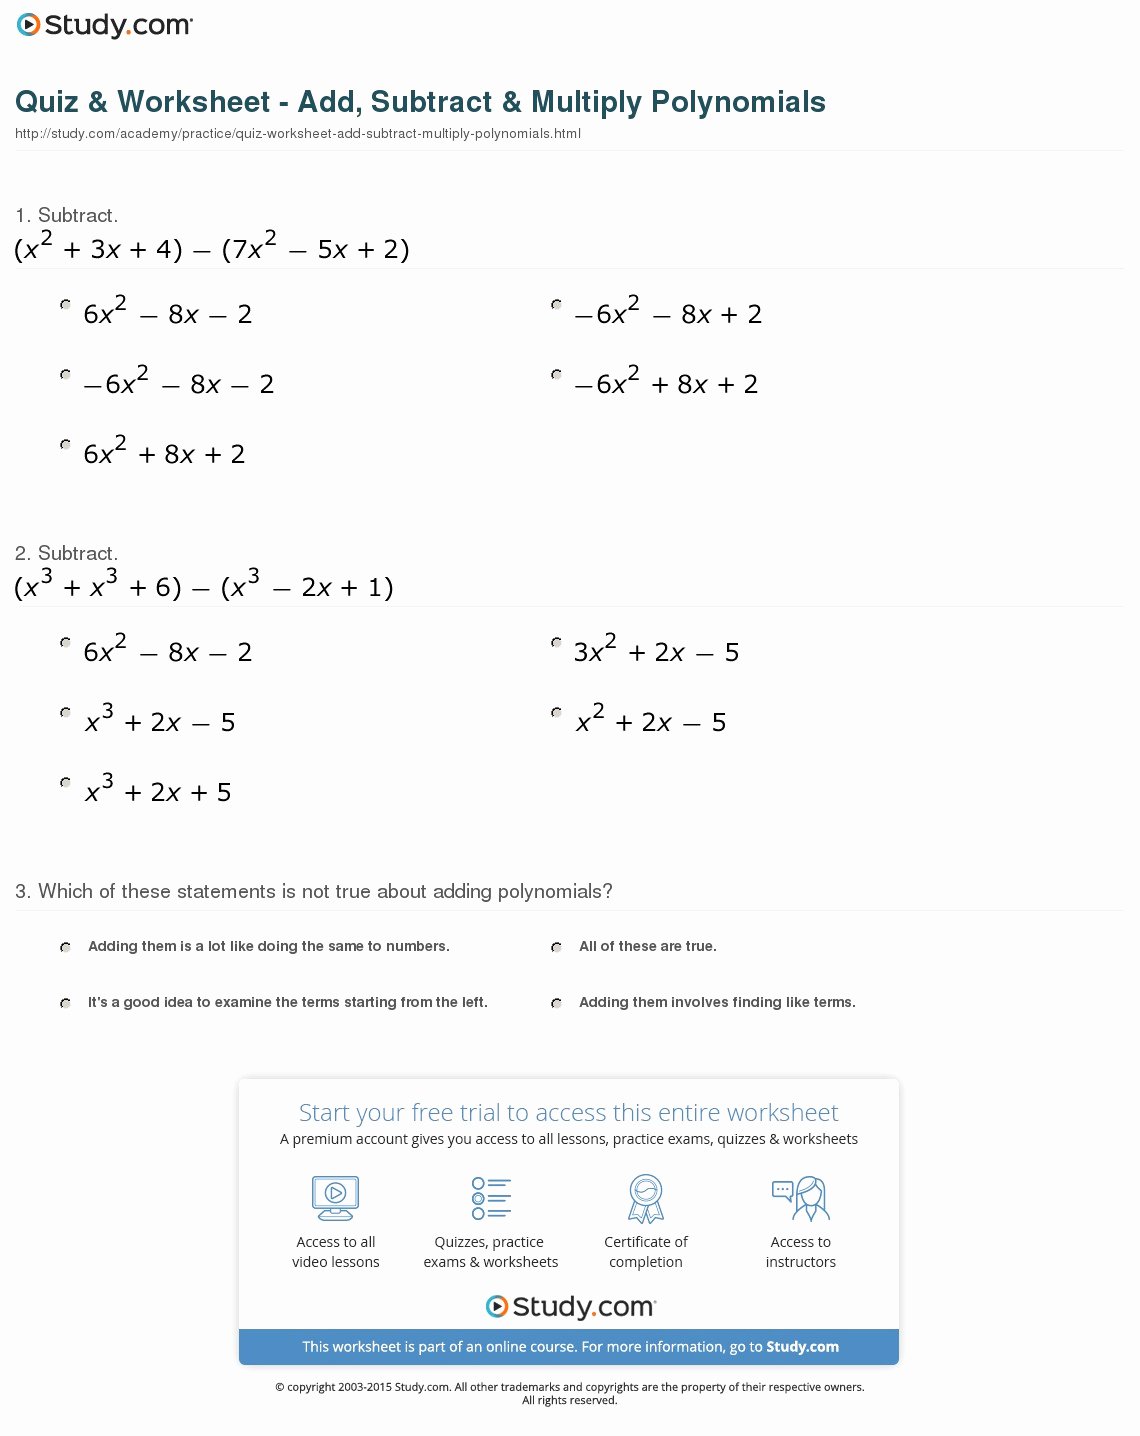 Adding and Subtracting Polynomials Worksheet Lovely Quiz &amp; Worksheet Add Subtract &amp; Multiply Polynomials